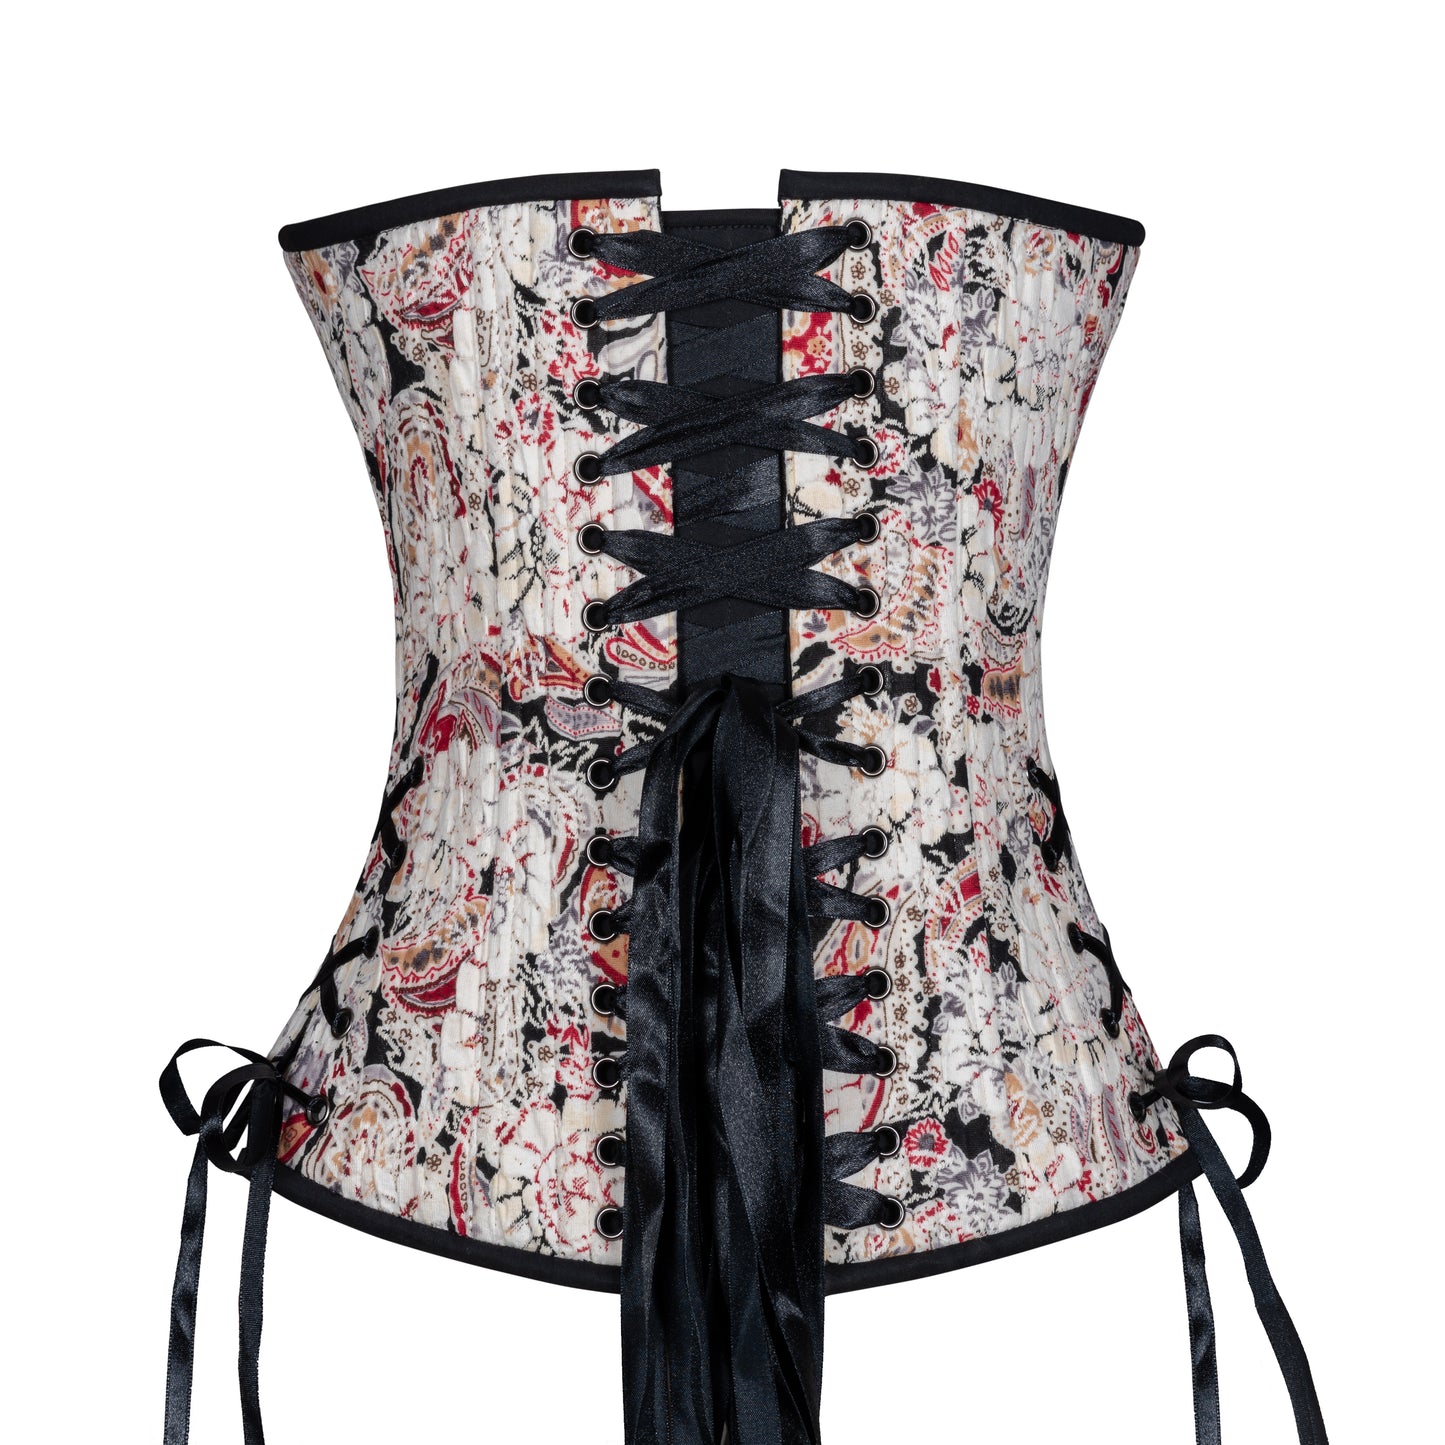 The Look of Lace Overbust Corset, Slim Silhouette, Regular